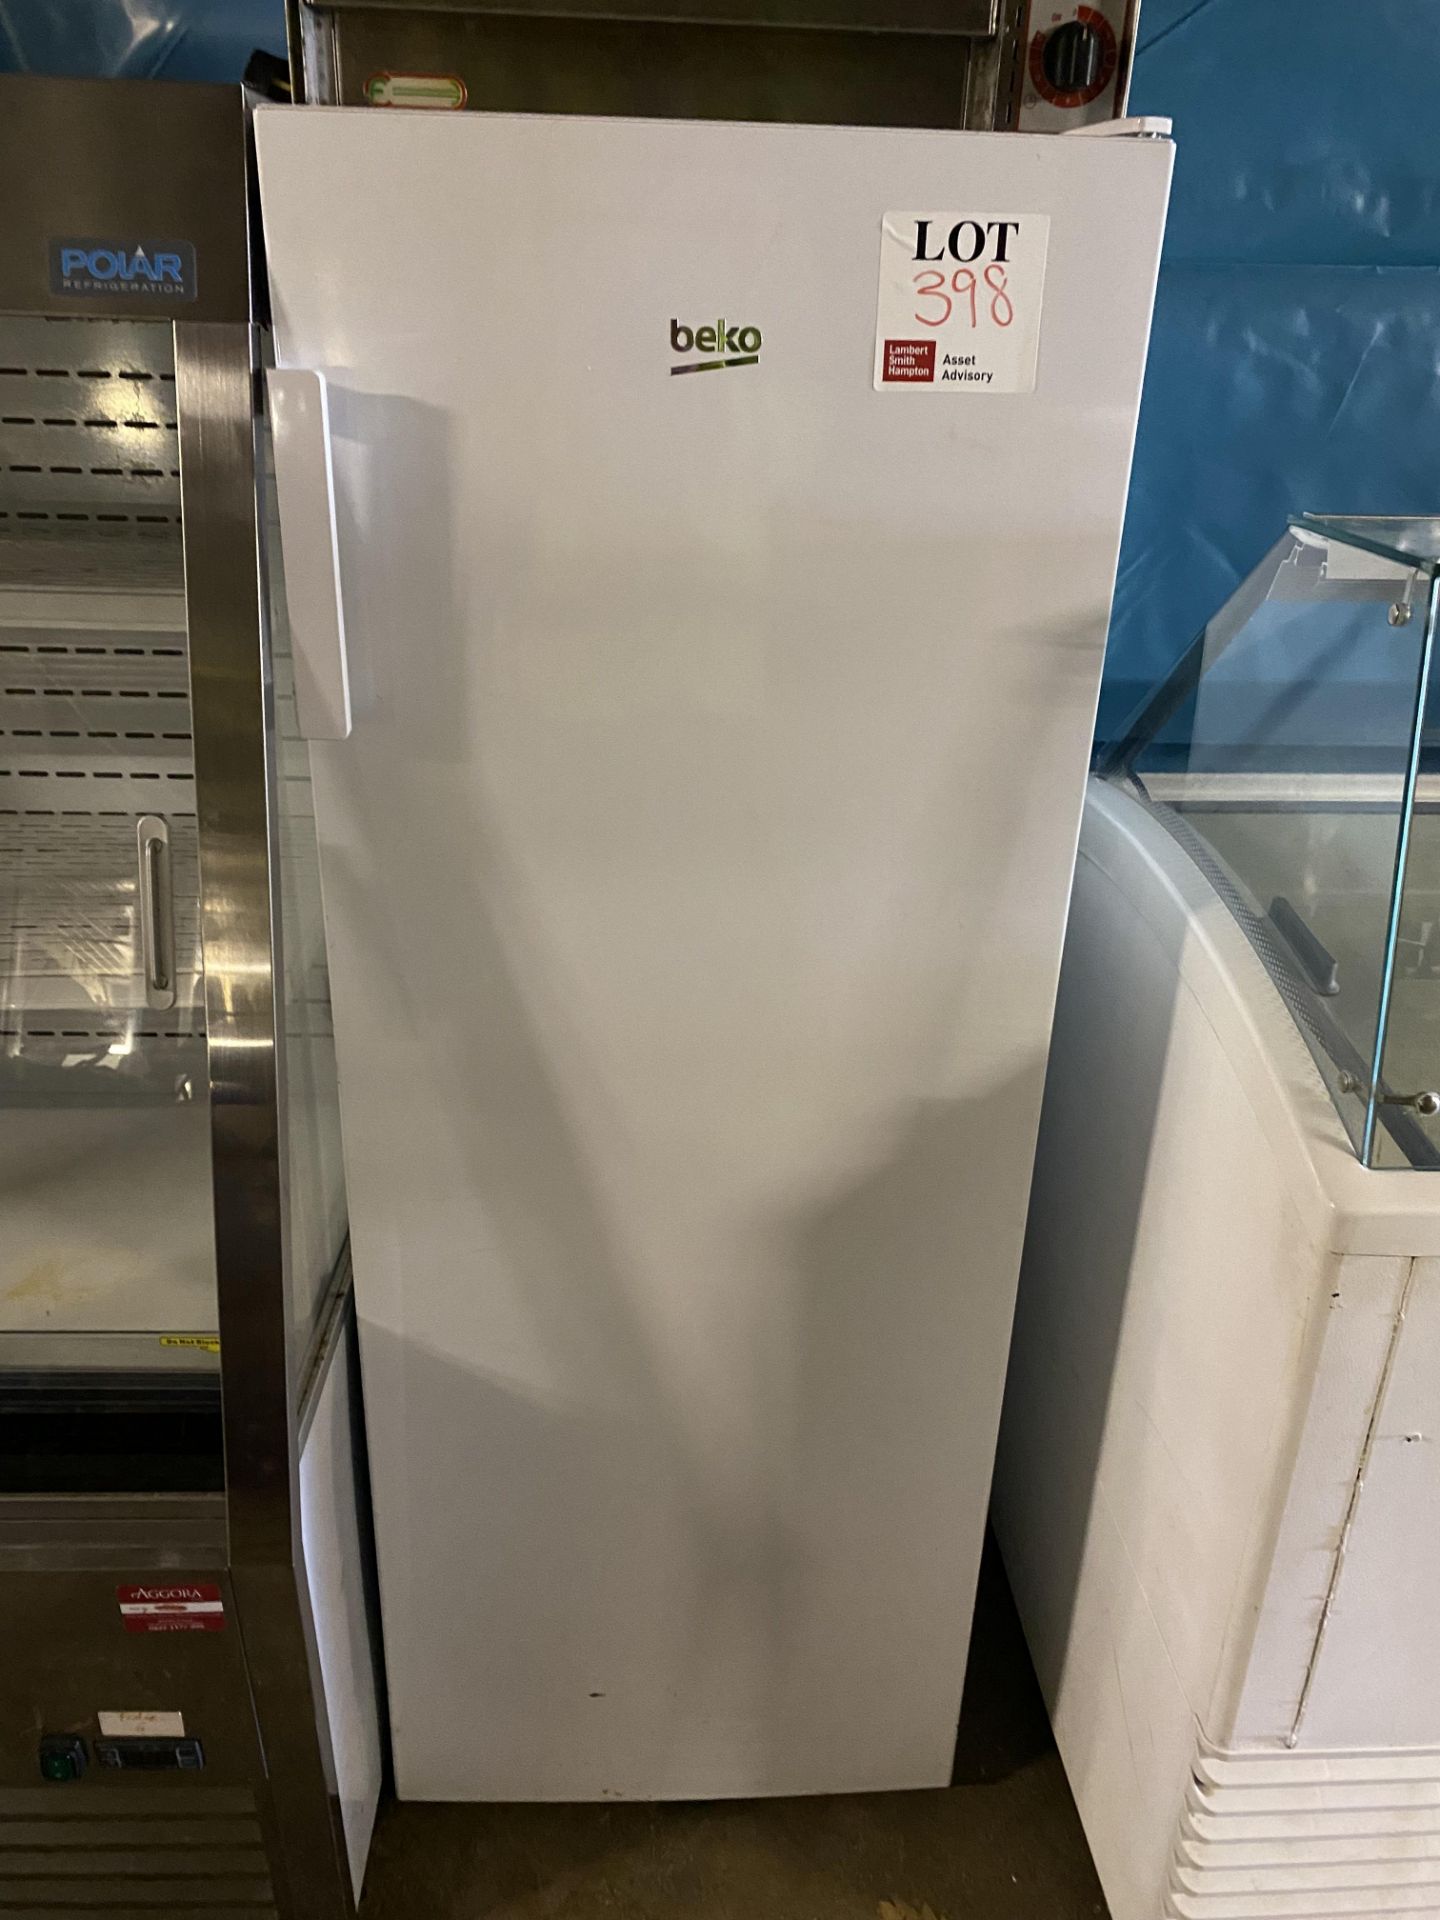 Beko upright domestic fridge, approx 145cm tall (working condition unknown)